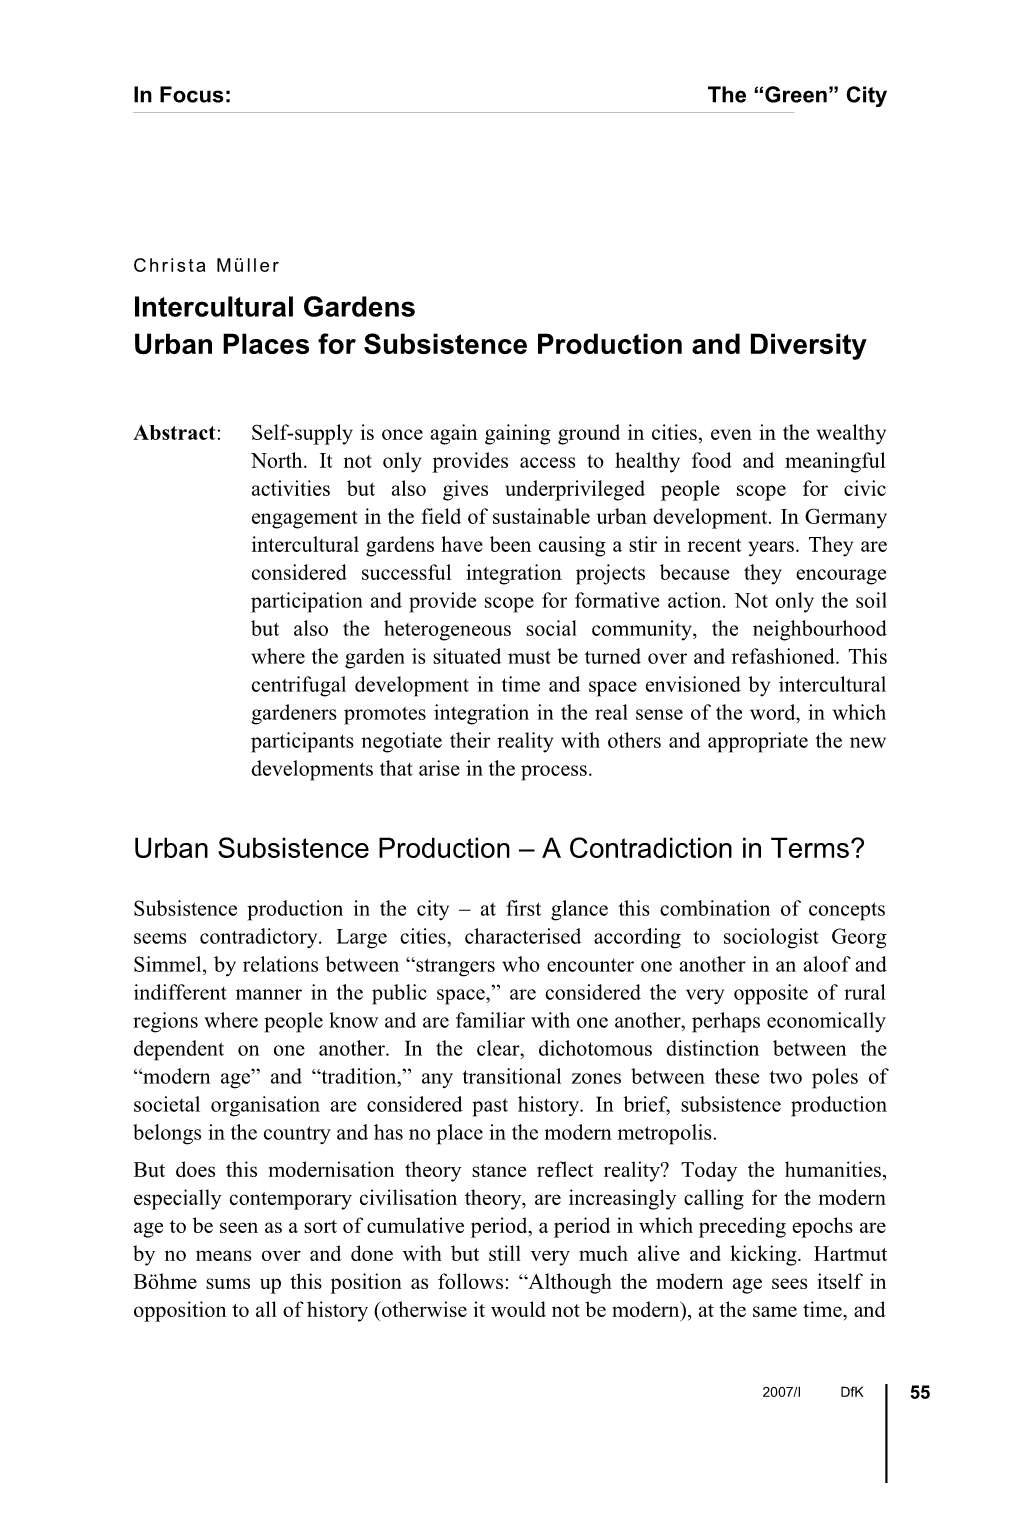 Urban Subsistence Production a Contradiction in Terms?